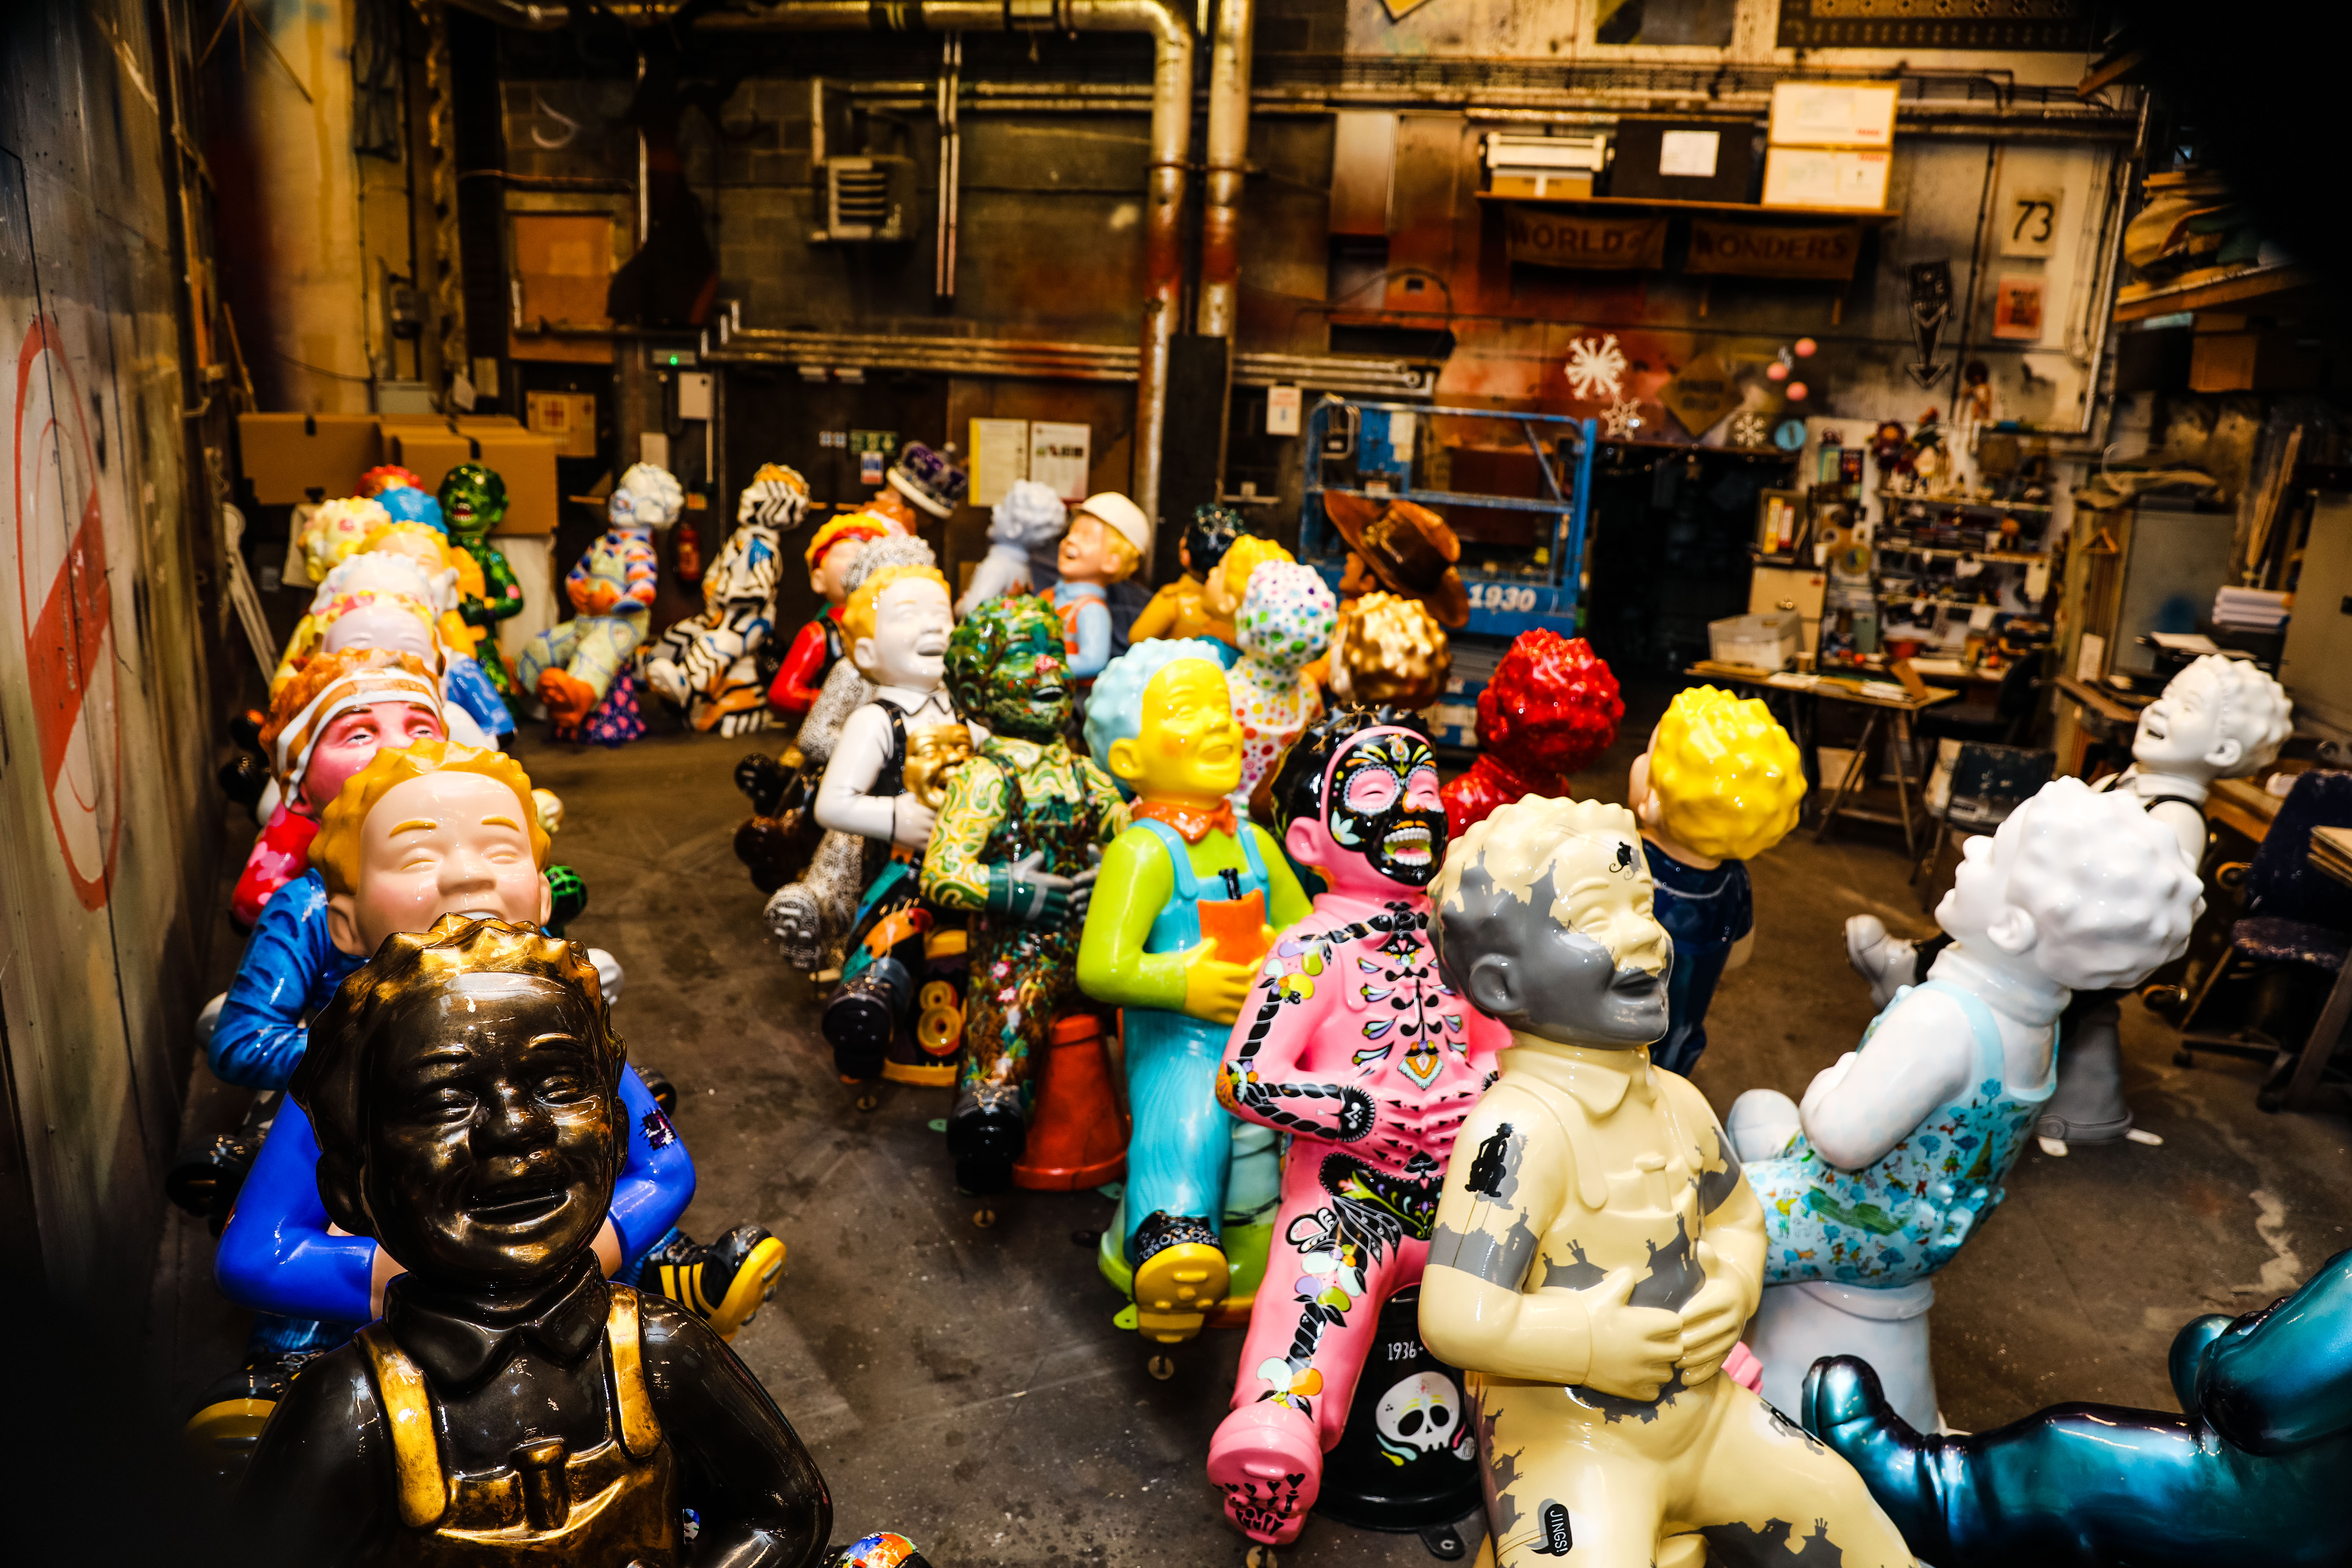 All the statues together before the auction kicked off. Picture by Steve Brown / DCT Media